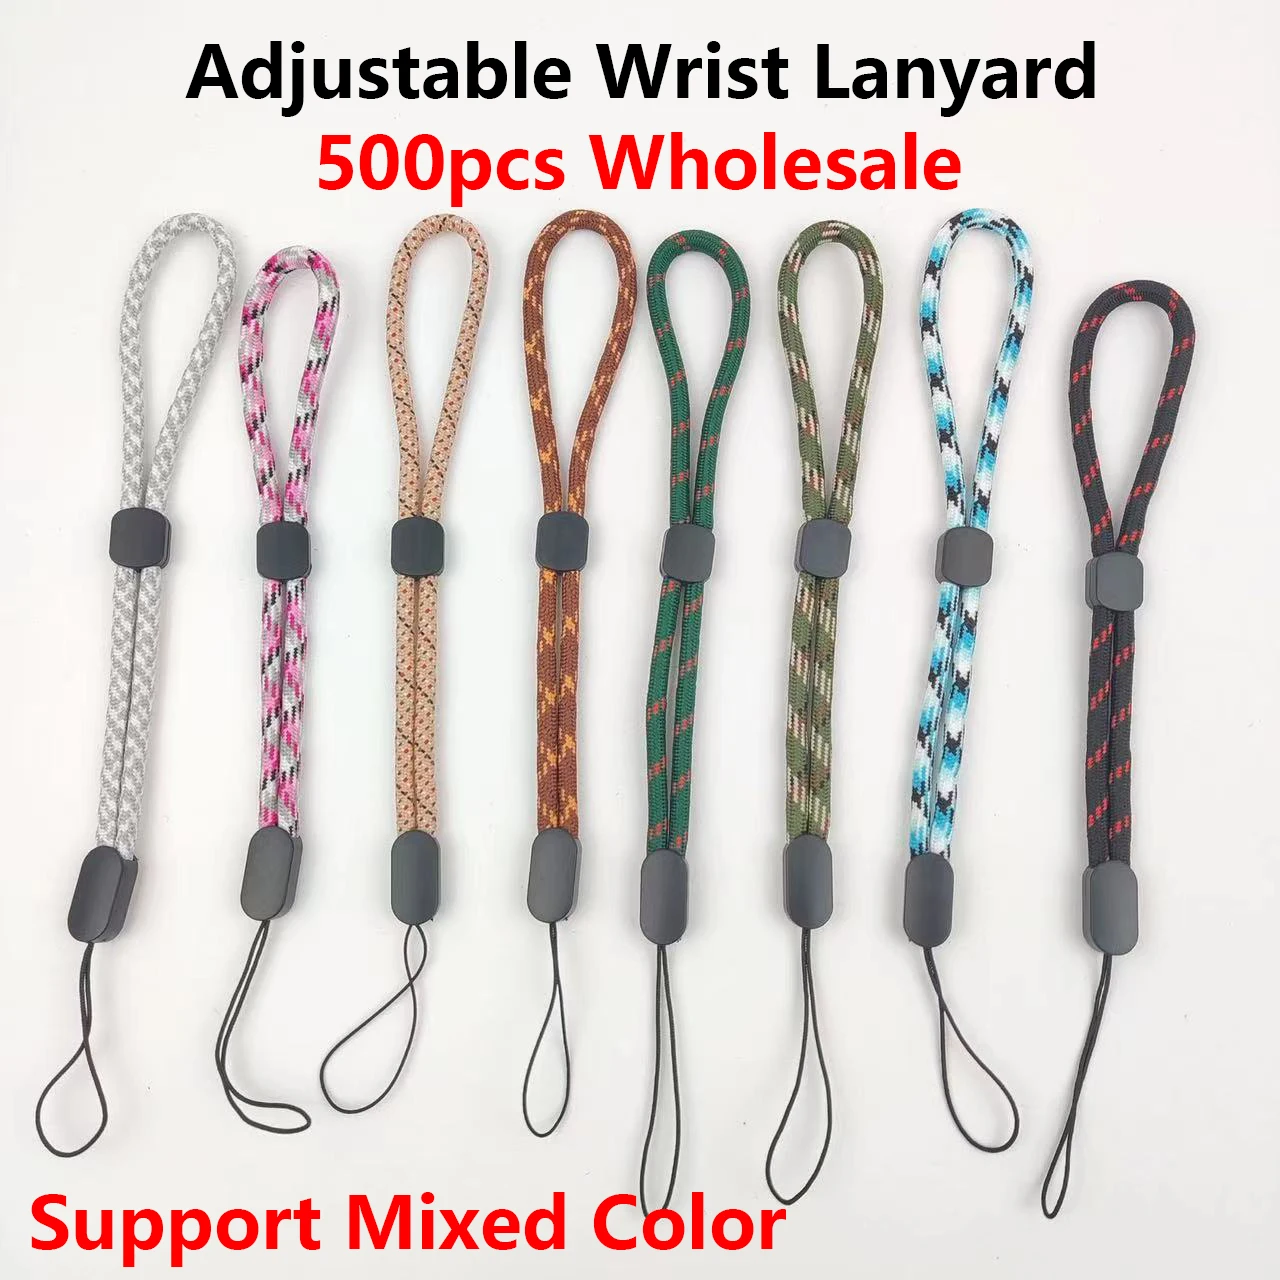 

500pcs Adjustable Mobile Phone Wrist Strap Hand Lanyard For iPhone Samsung Xiaomi USB Gadget Key PSP Anti Lost Rope Cord Keycord